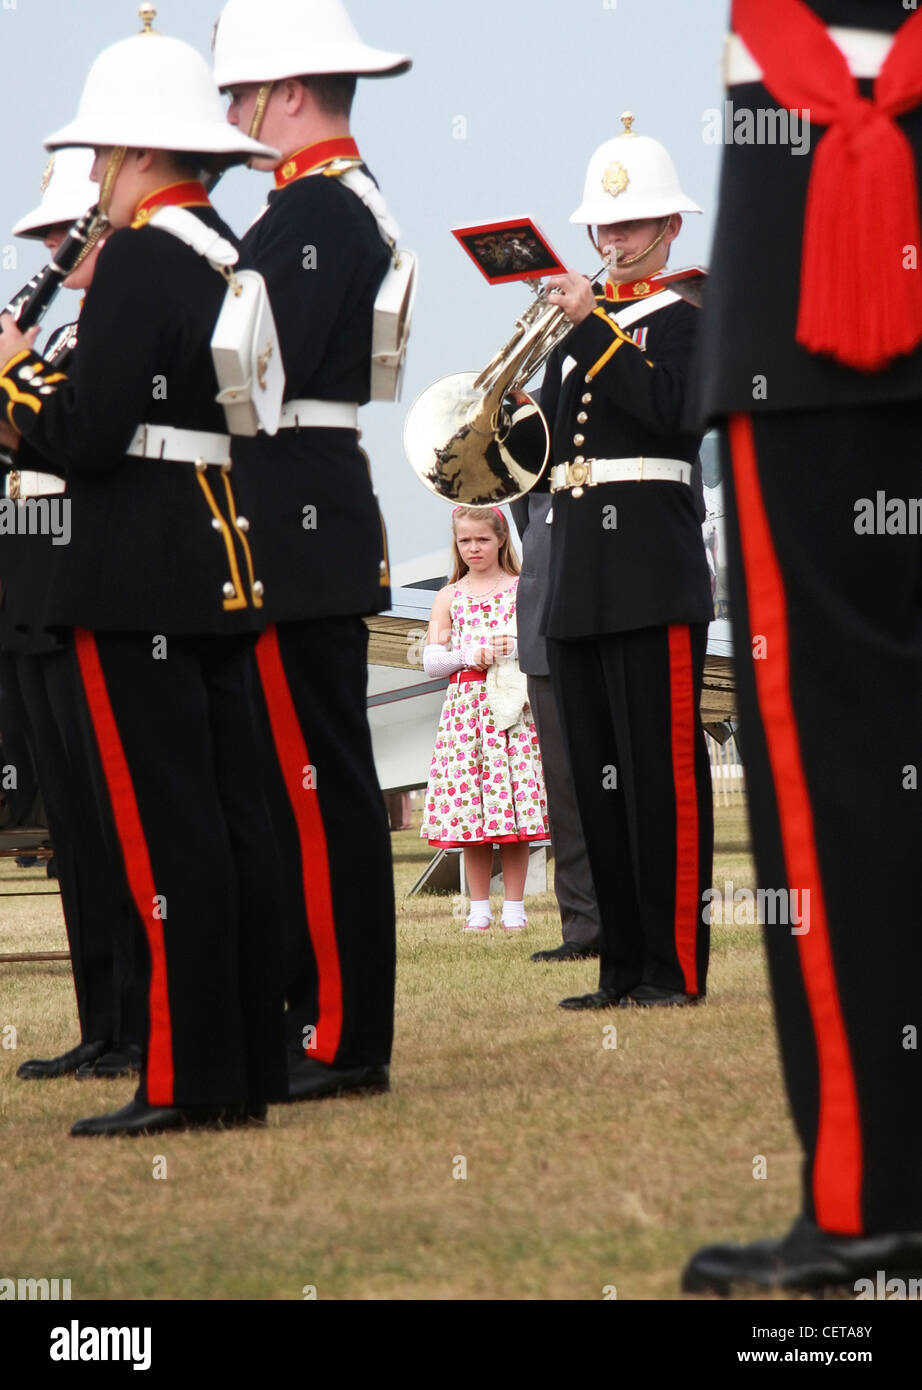 Girl is flower dress listening to Military band at Goodwood Revival. Stock Photo